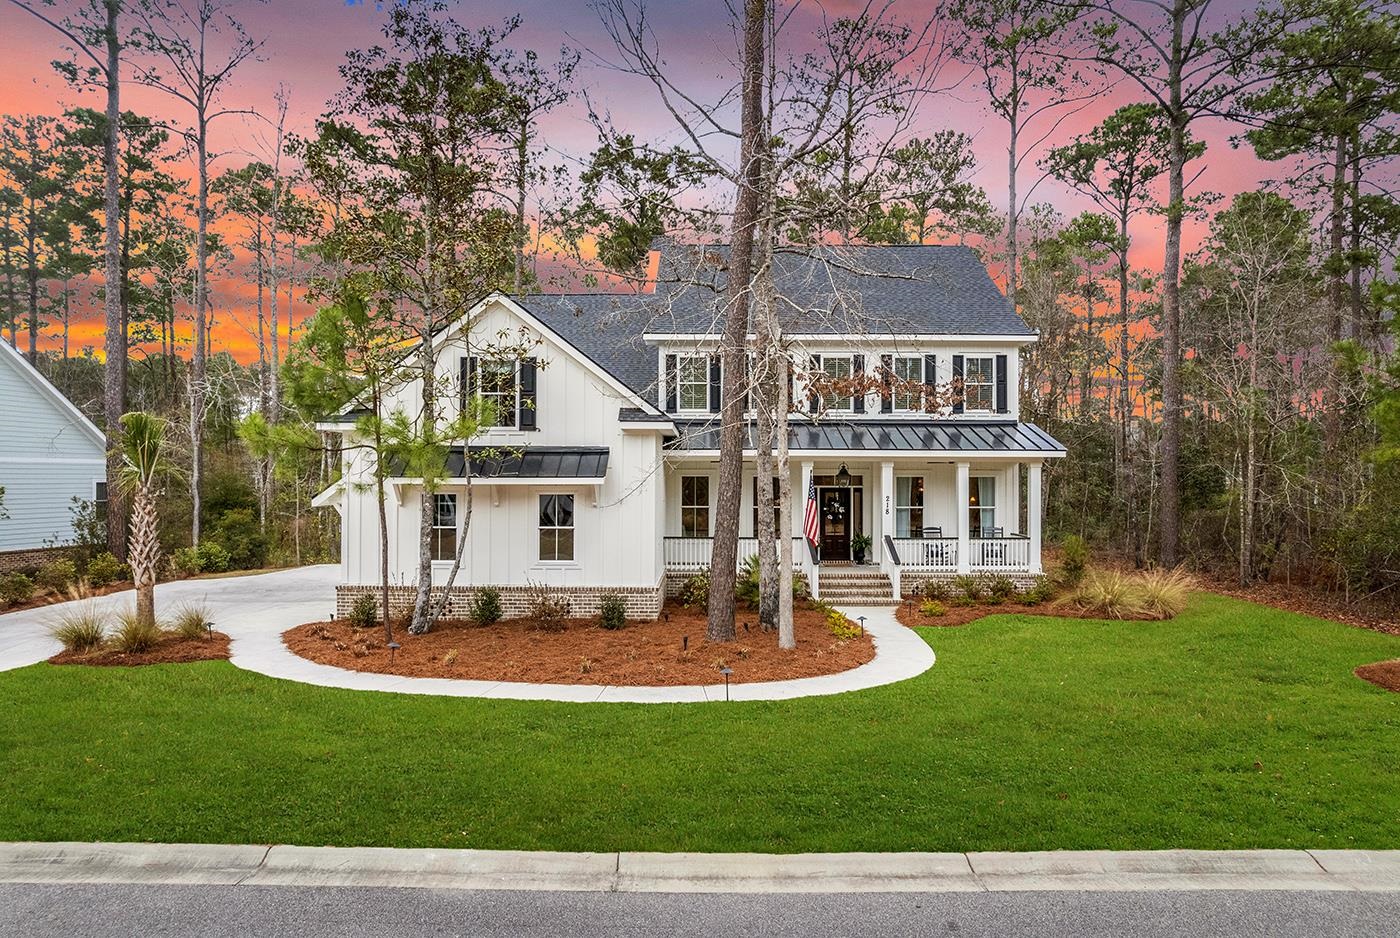 218 Woody Point Dr. Murrells Inlet, SC 29576